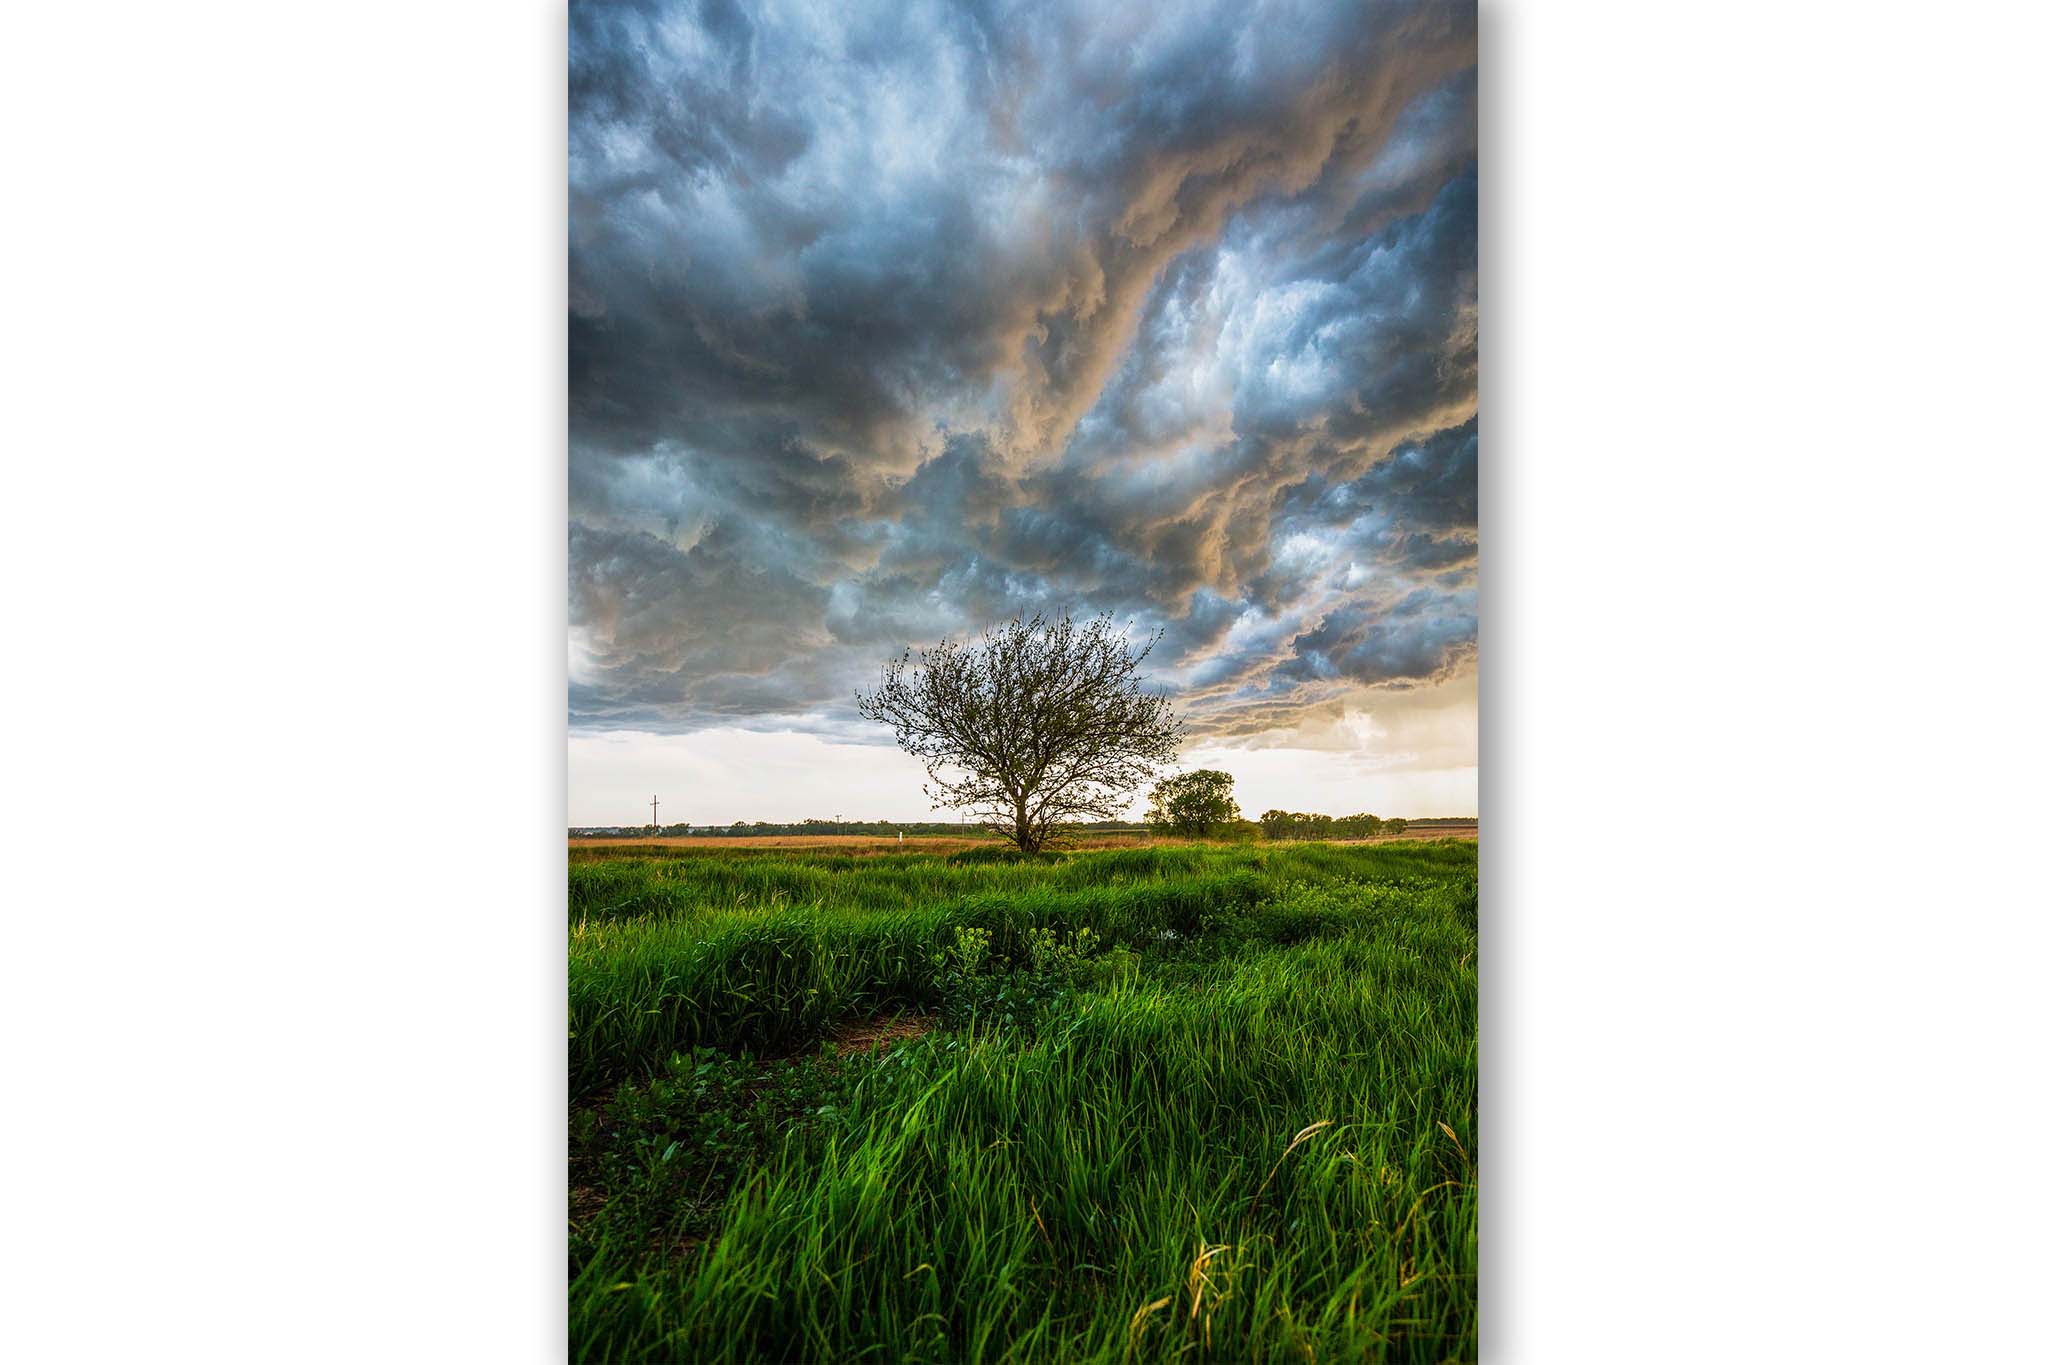 Spitzenklasse Great Plains Photo Print | – | Picture Sky Photography Plains Kansas Southern Tree Wall Stormy Under